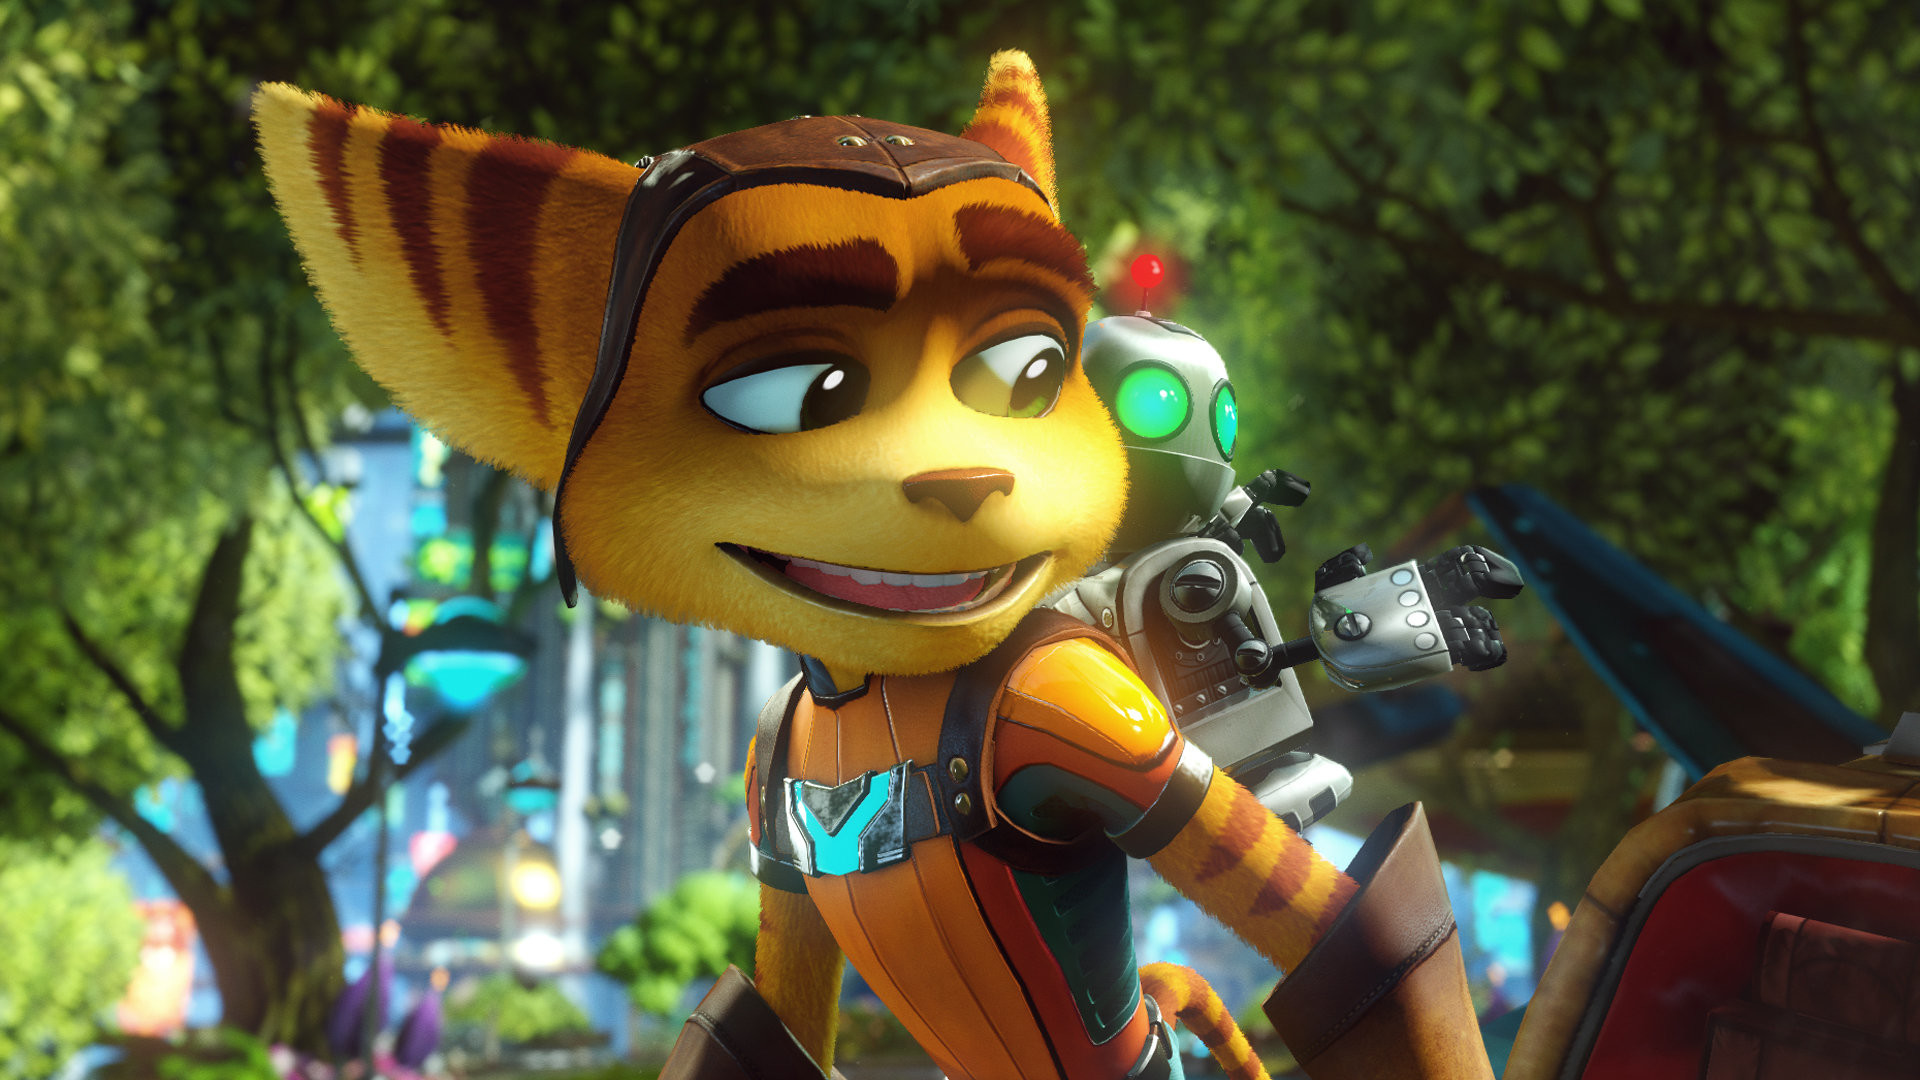 Ratchet & Clank, Star Fox Zero, and Quantum Break are 3 Reasons to be  Excited for April Gaming